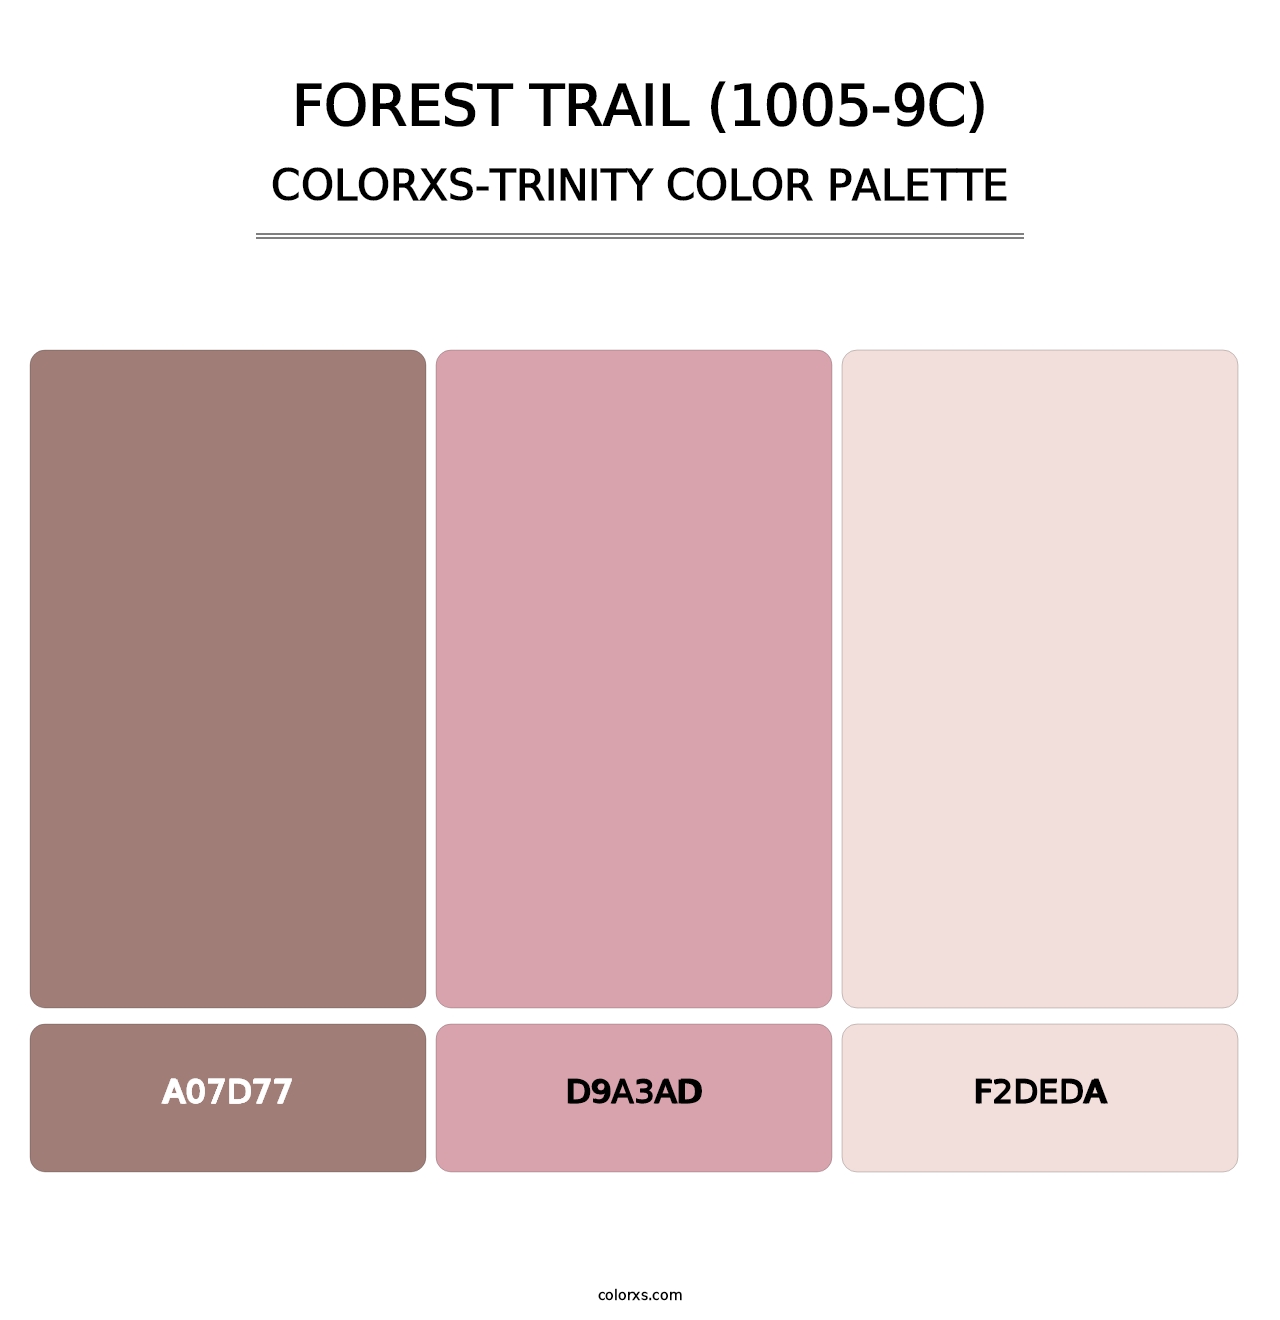 Forest Trail (1005-9C) - Colorxs Trinity Palette